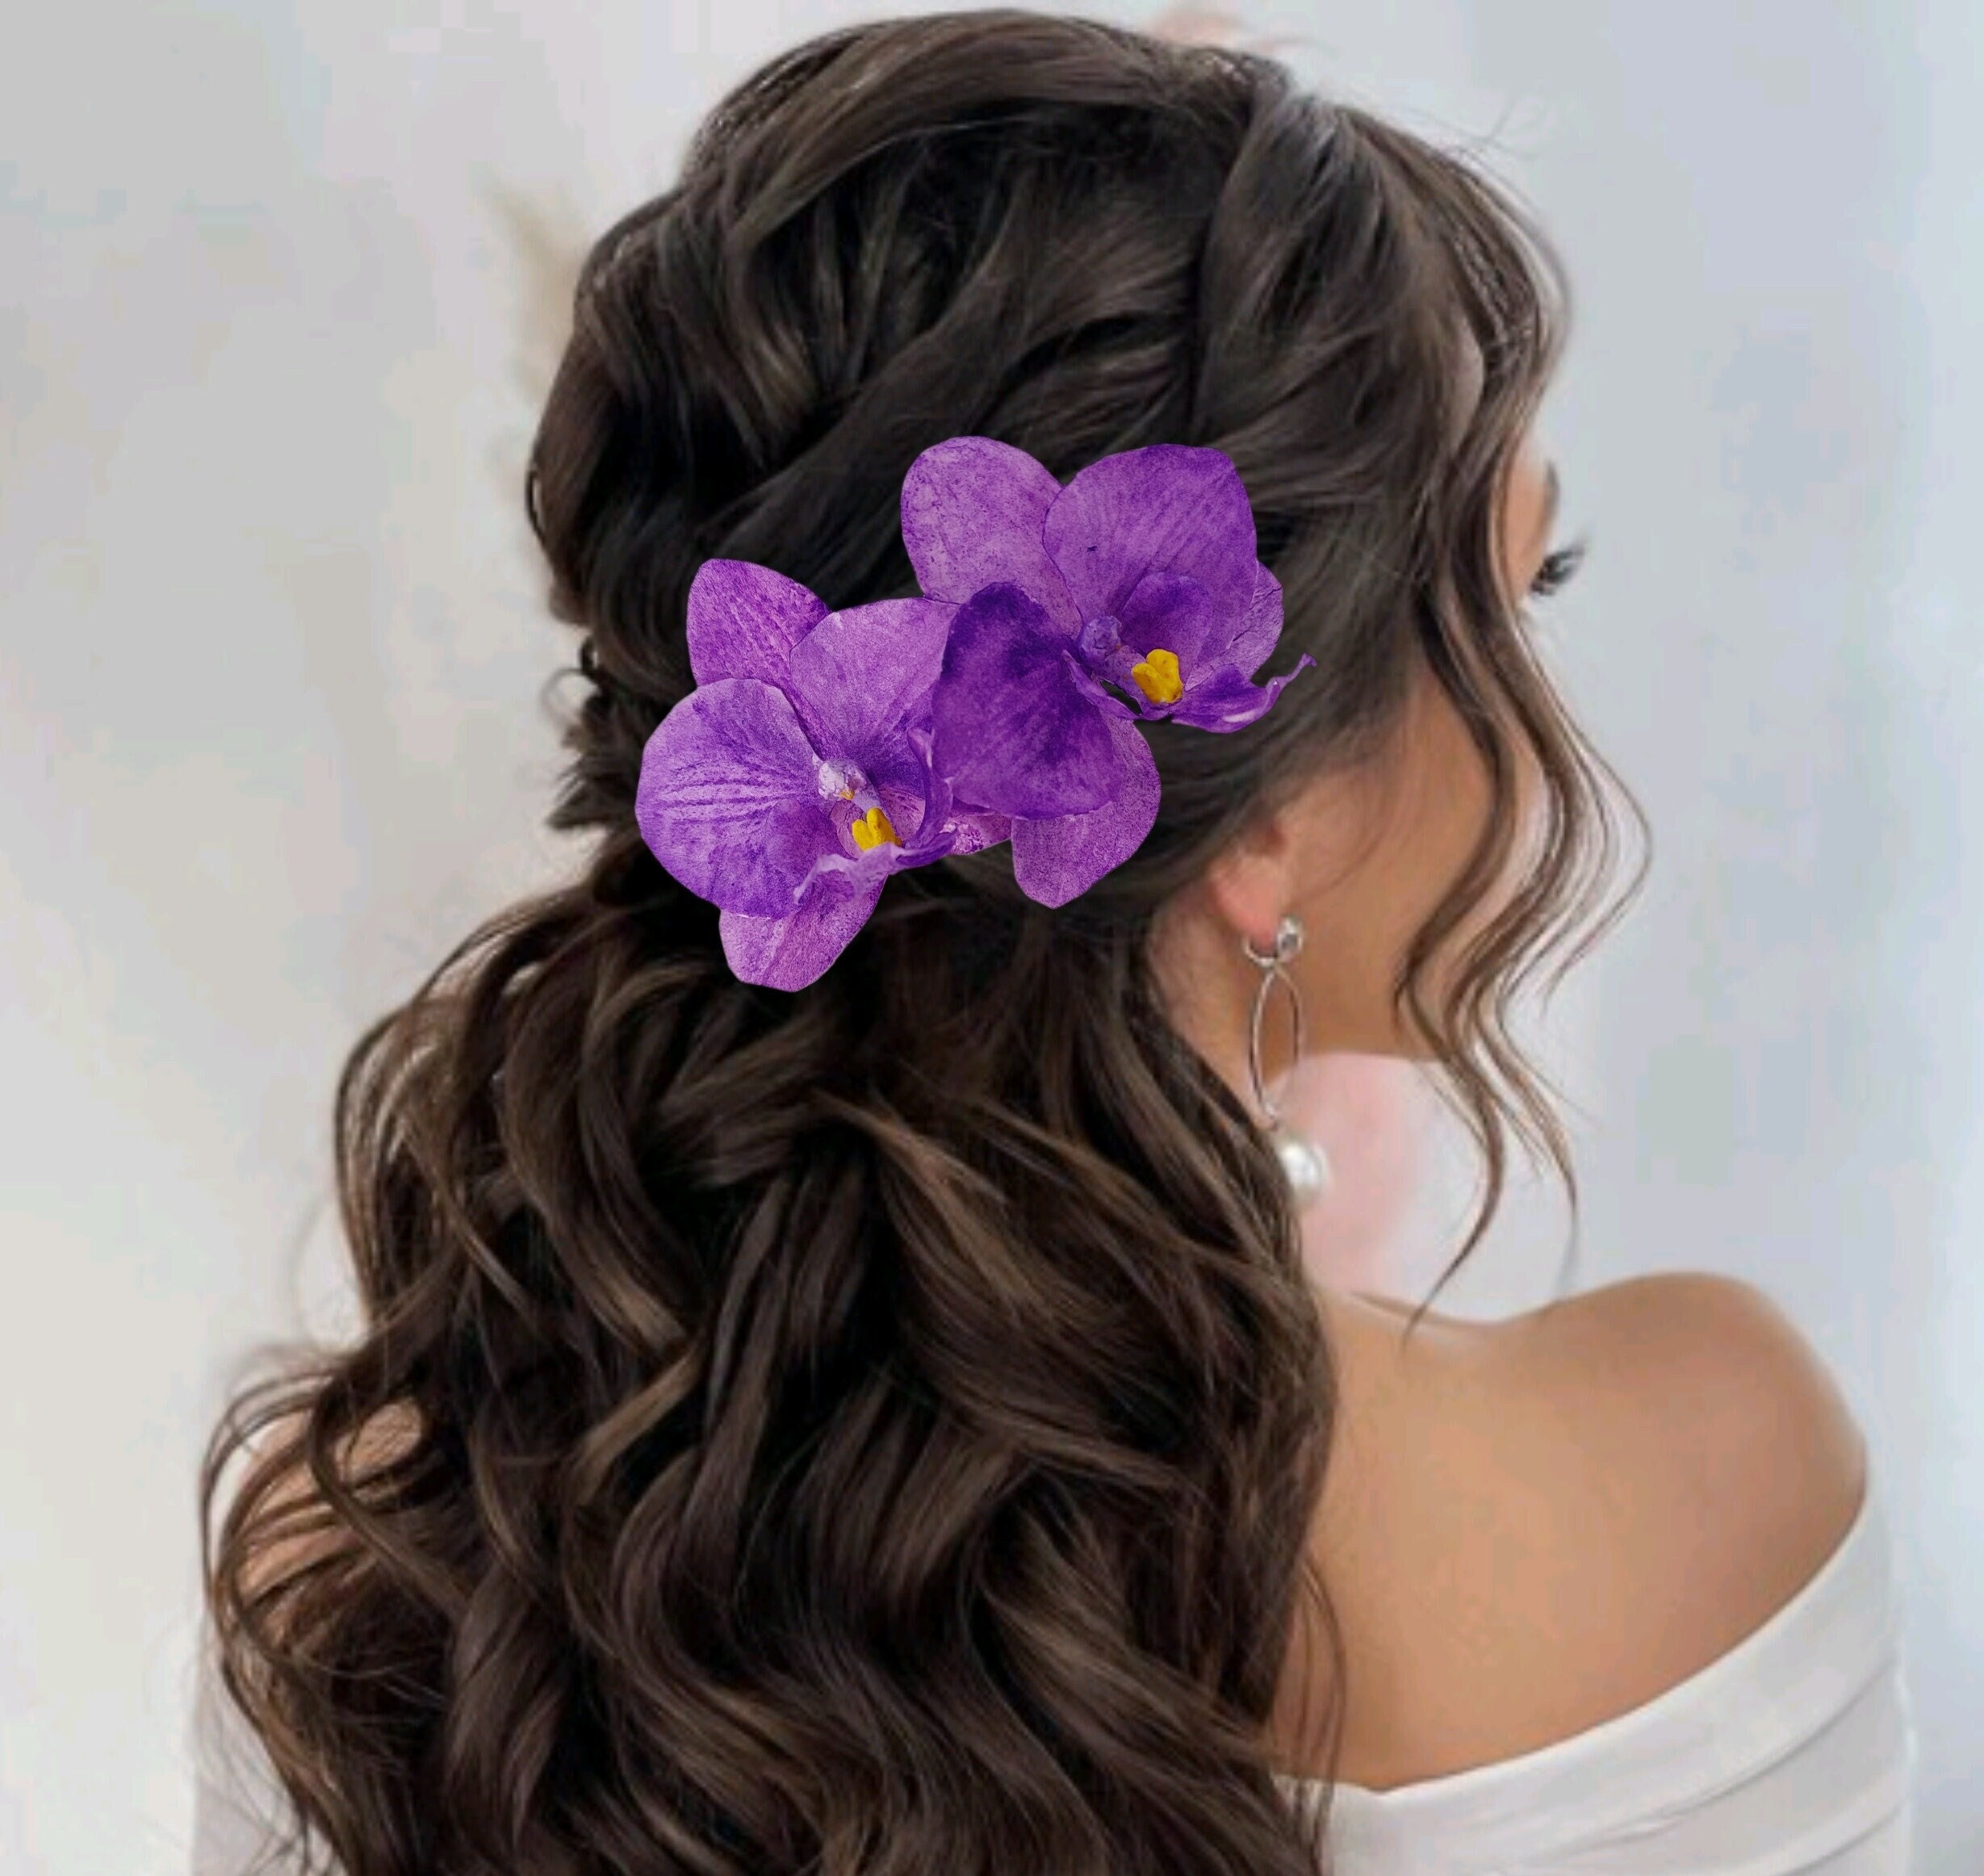 5 Winter Flowers for your Bridal Hairstyle | Bridal Look | Wedding Blog